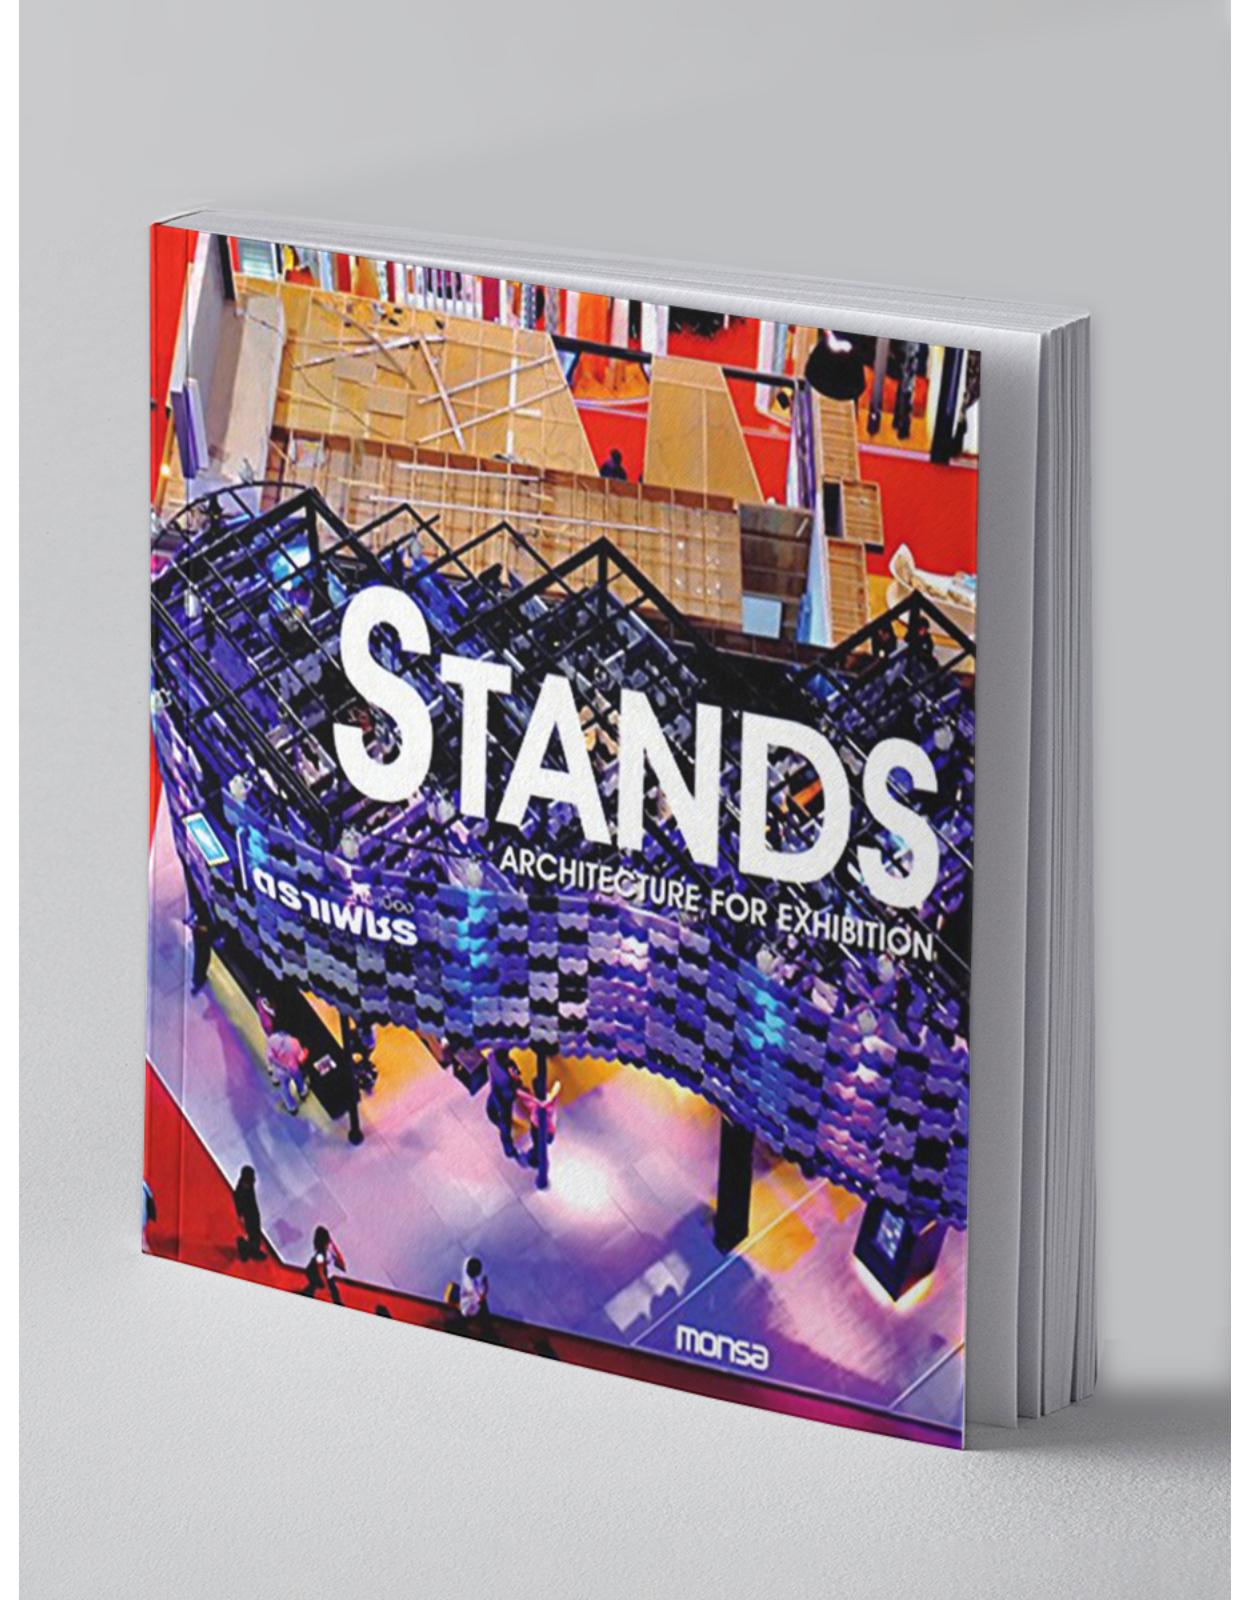 Stands: Architecture for Exhibition